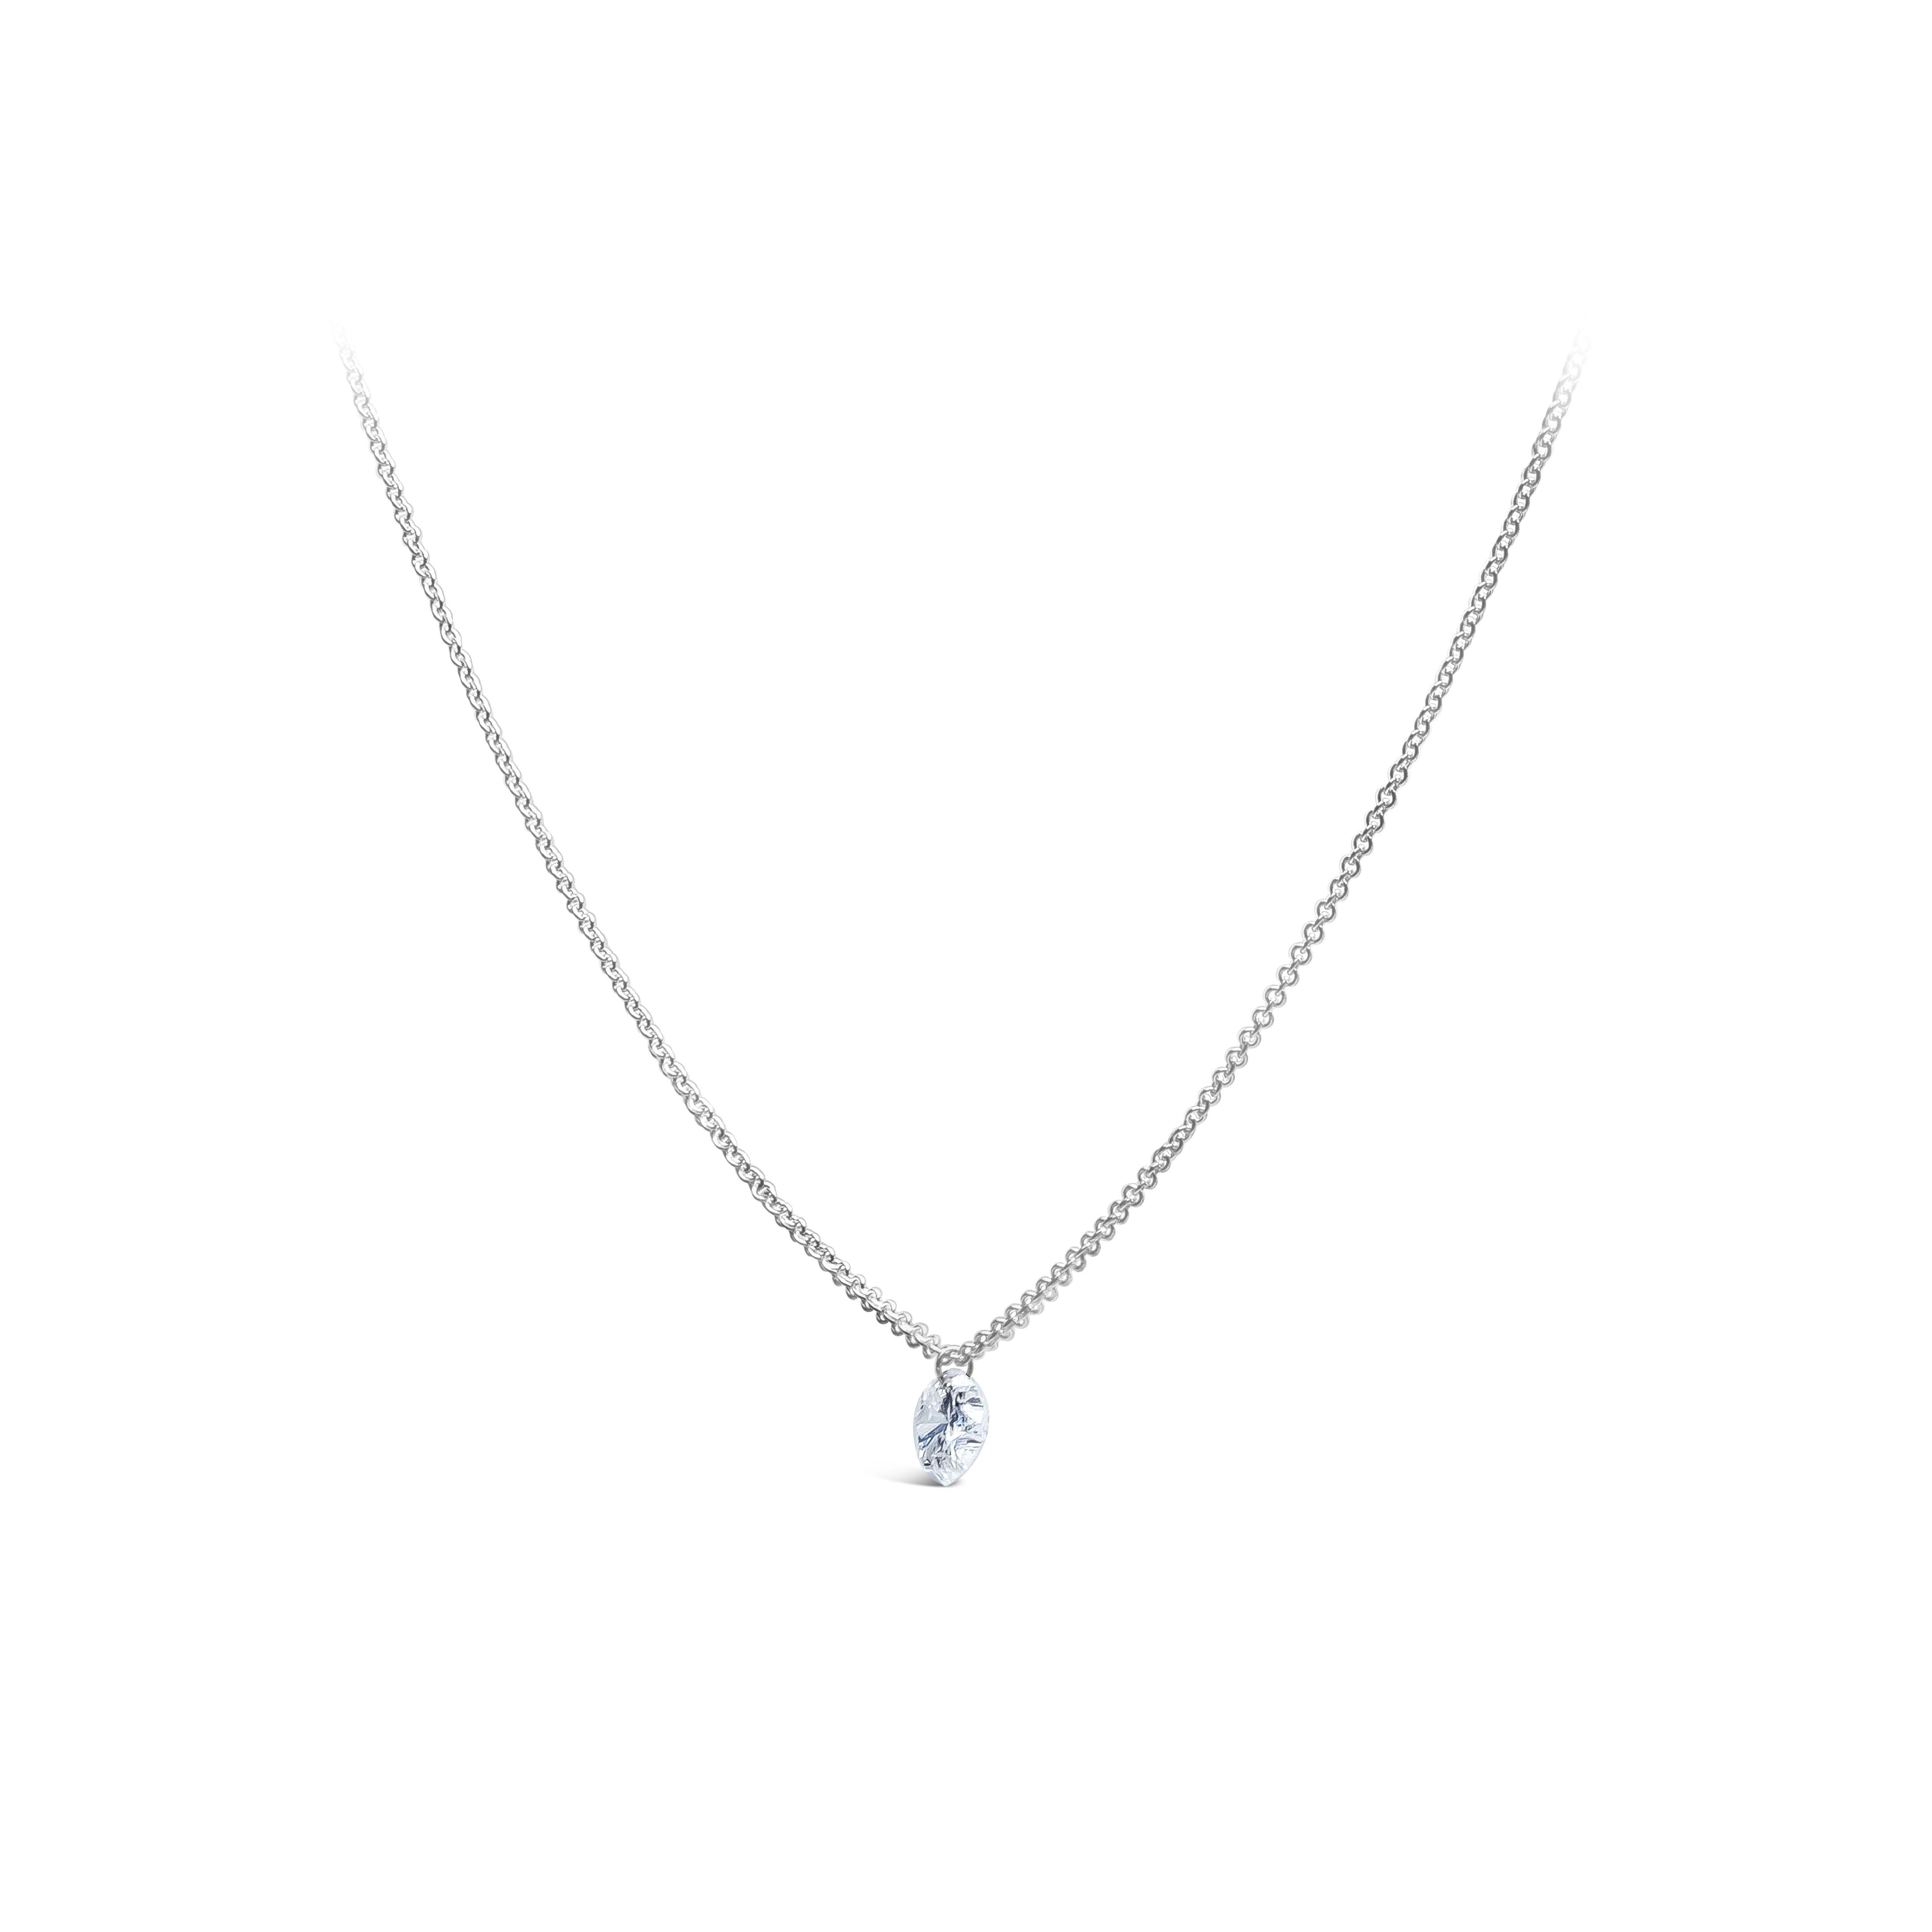 This unique and simple floating solitaire pendant necklace featuring 0.58 carat, 8 sided star shape diamonds, D color and SI1 in clarity. Attached and drilled with 18K White Gold chain. 18 inches in length adjustable.

Style available in different